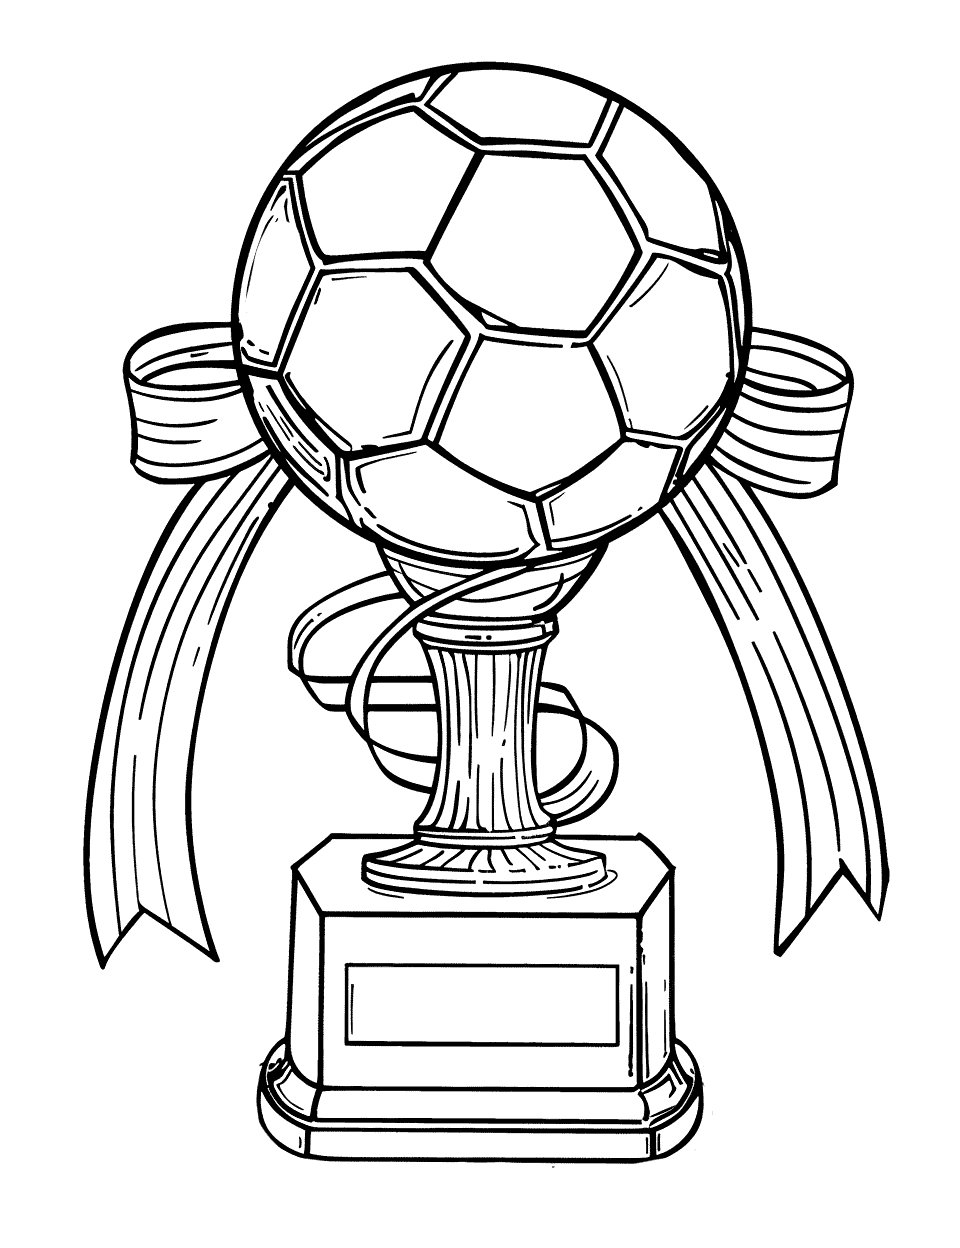 Soccer Trophy Display Coloring Page - A shiny soccer trophy displayed with ribbons around it.